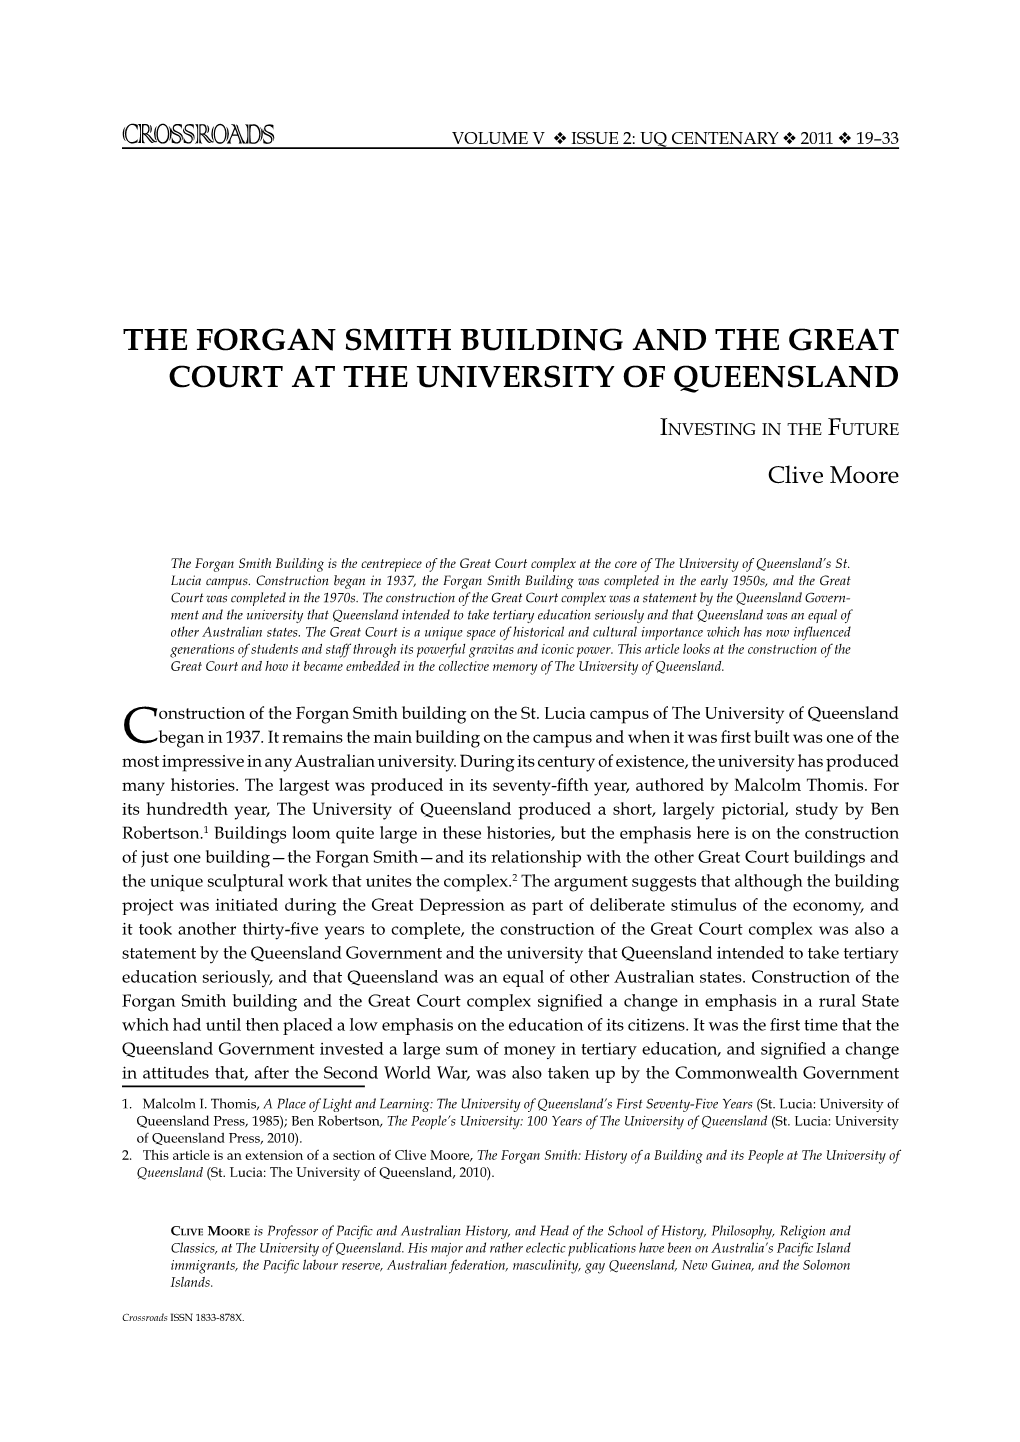 THE Forgan Smith Building and the Great Court at the University of Queensland